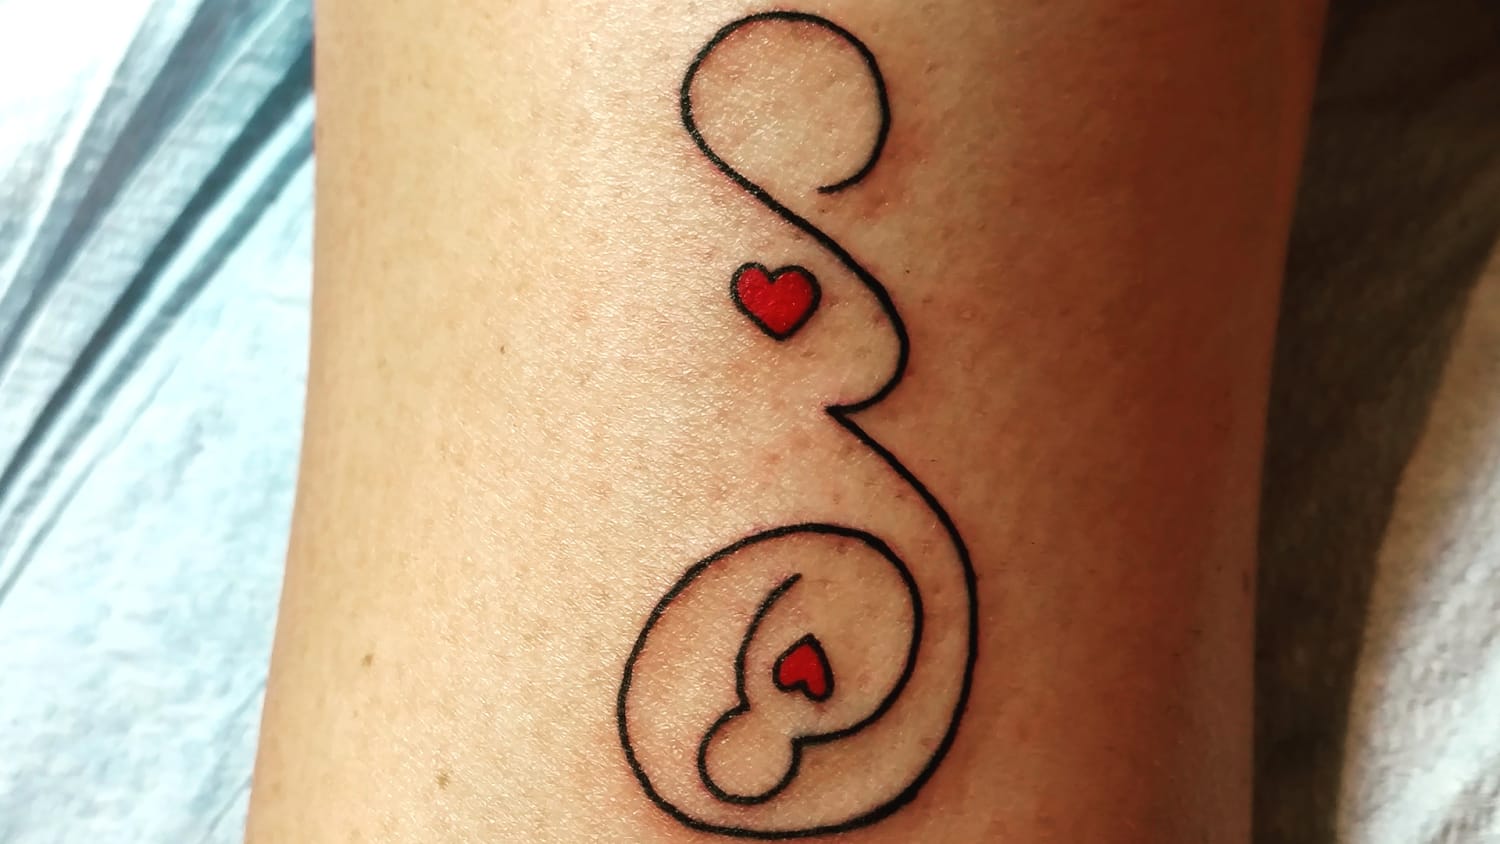 Mothers Debunk Myths Surrounding Pregnancy and Tattoos